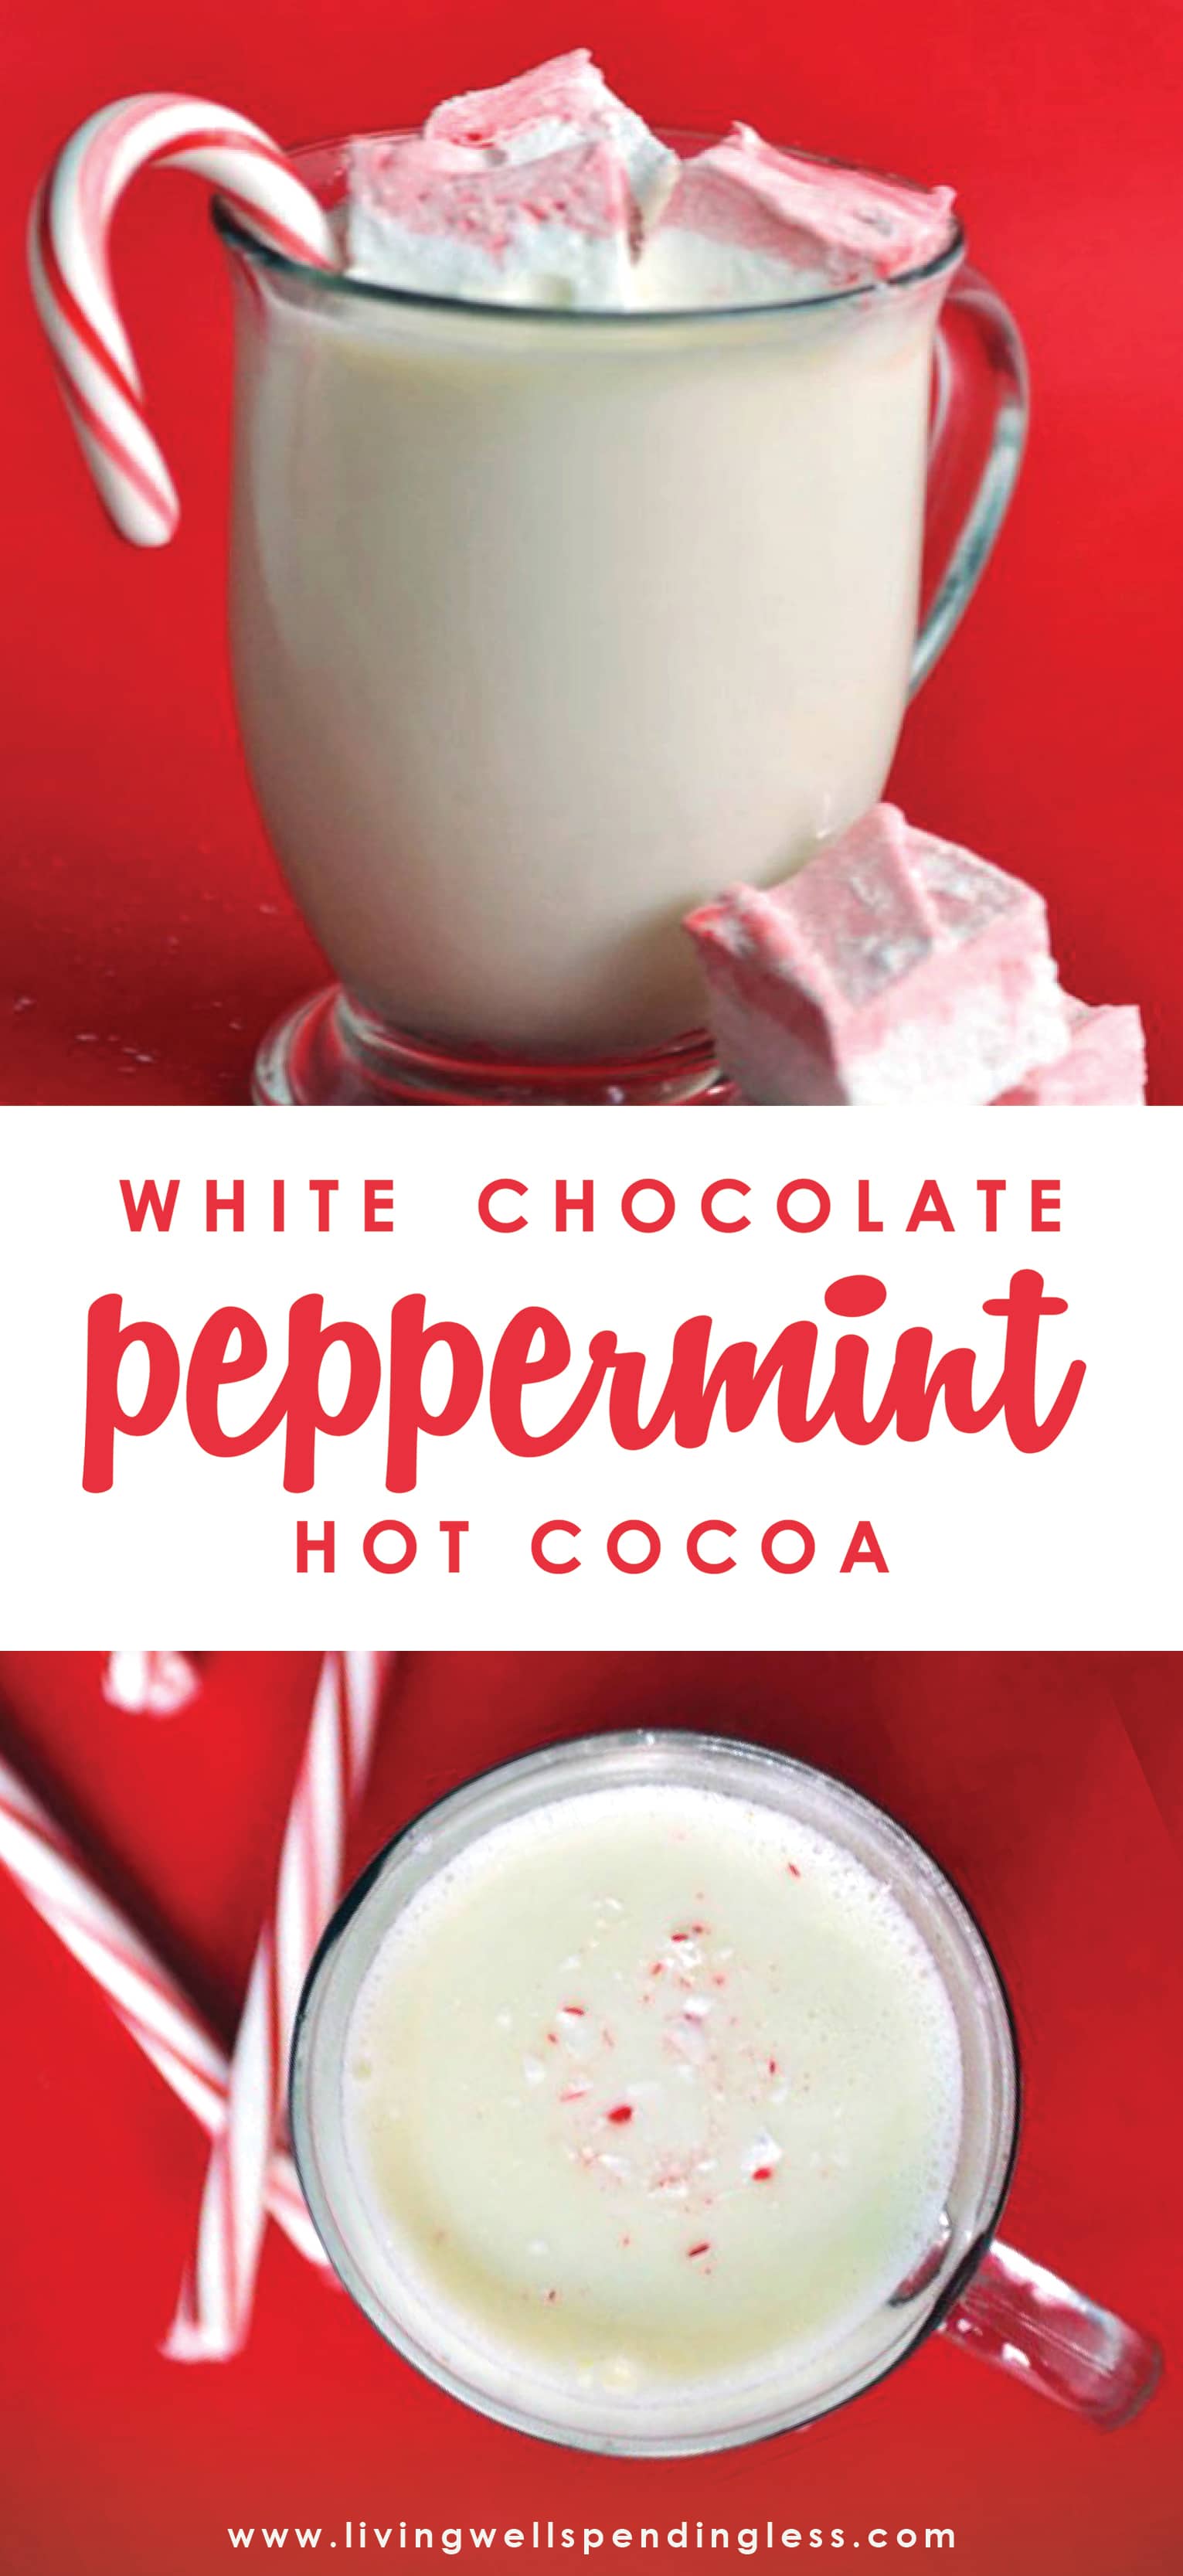 This Homemade White Chocolate Peppermint Hot Cocoa is sure to become a family favorite!